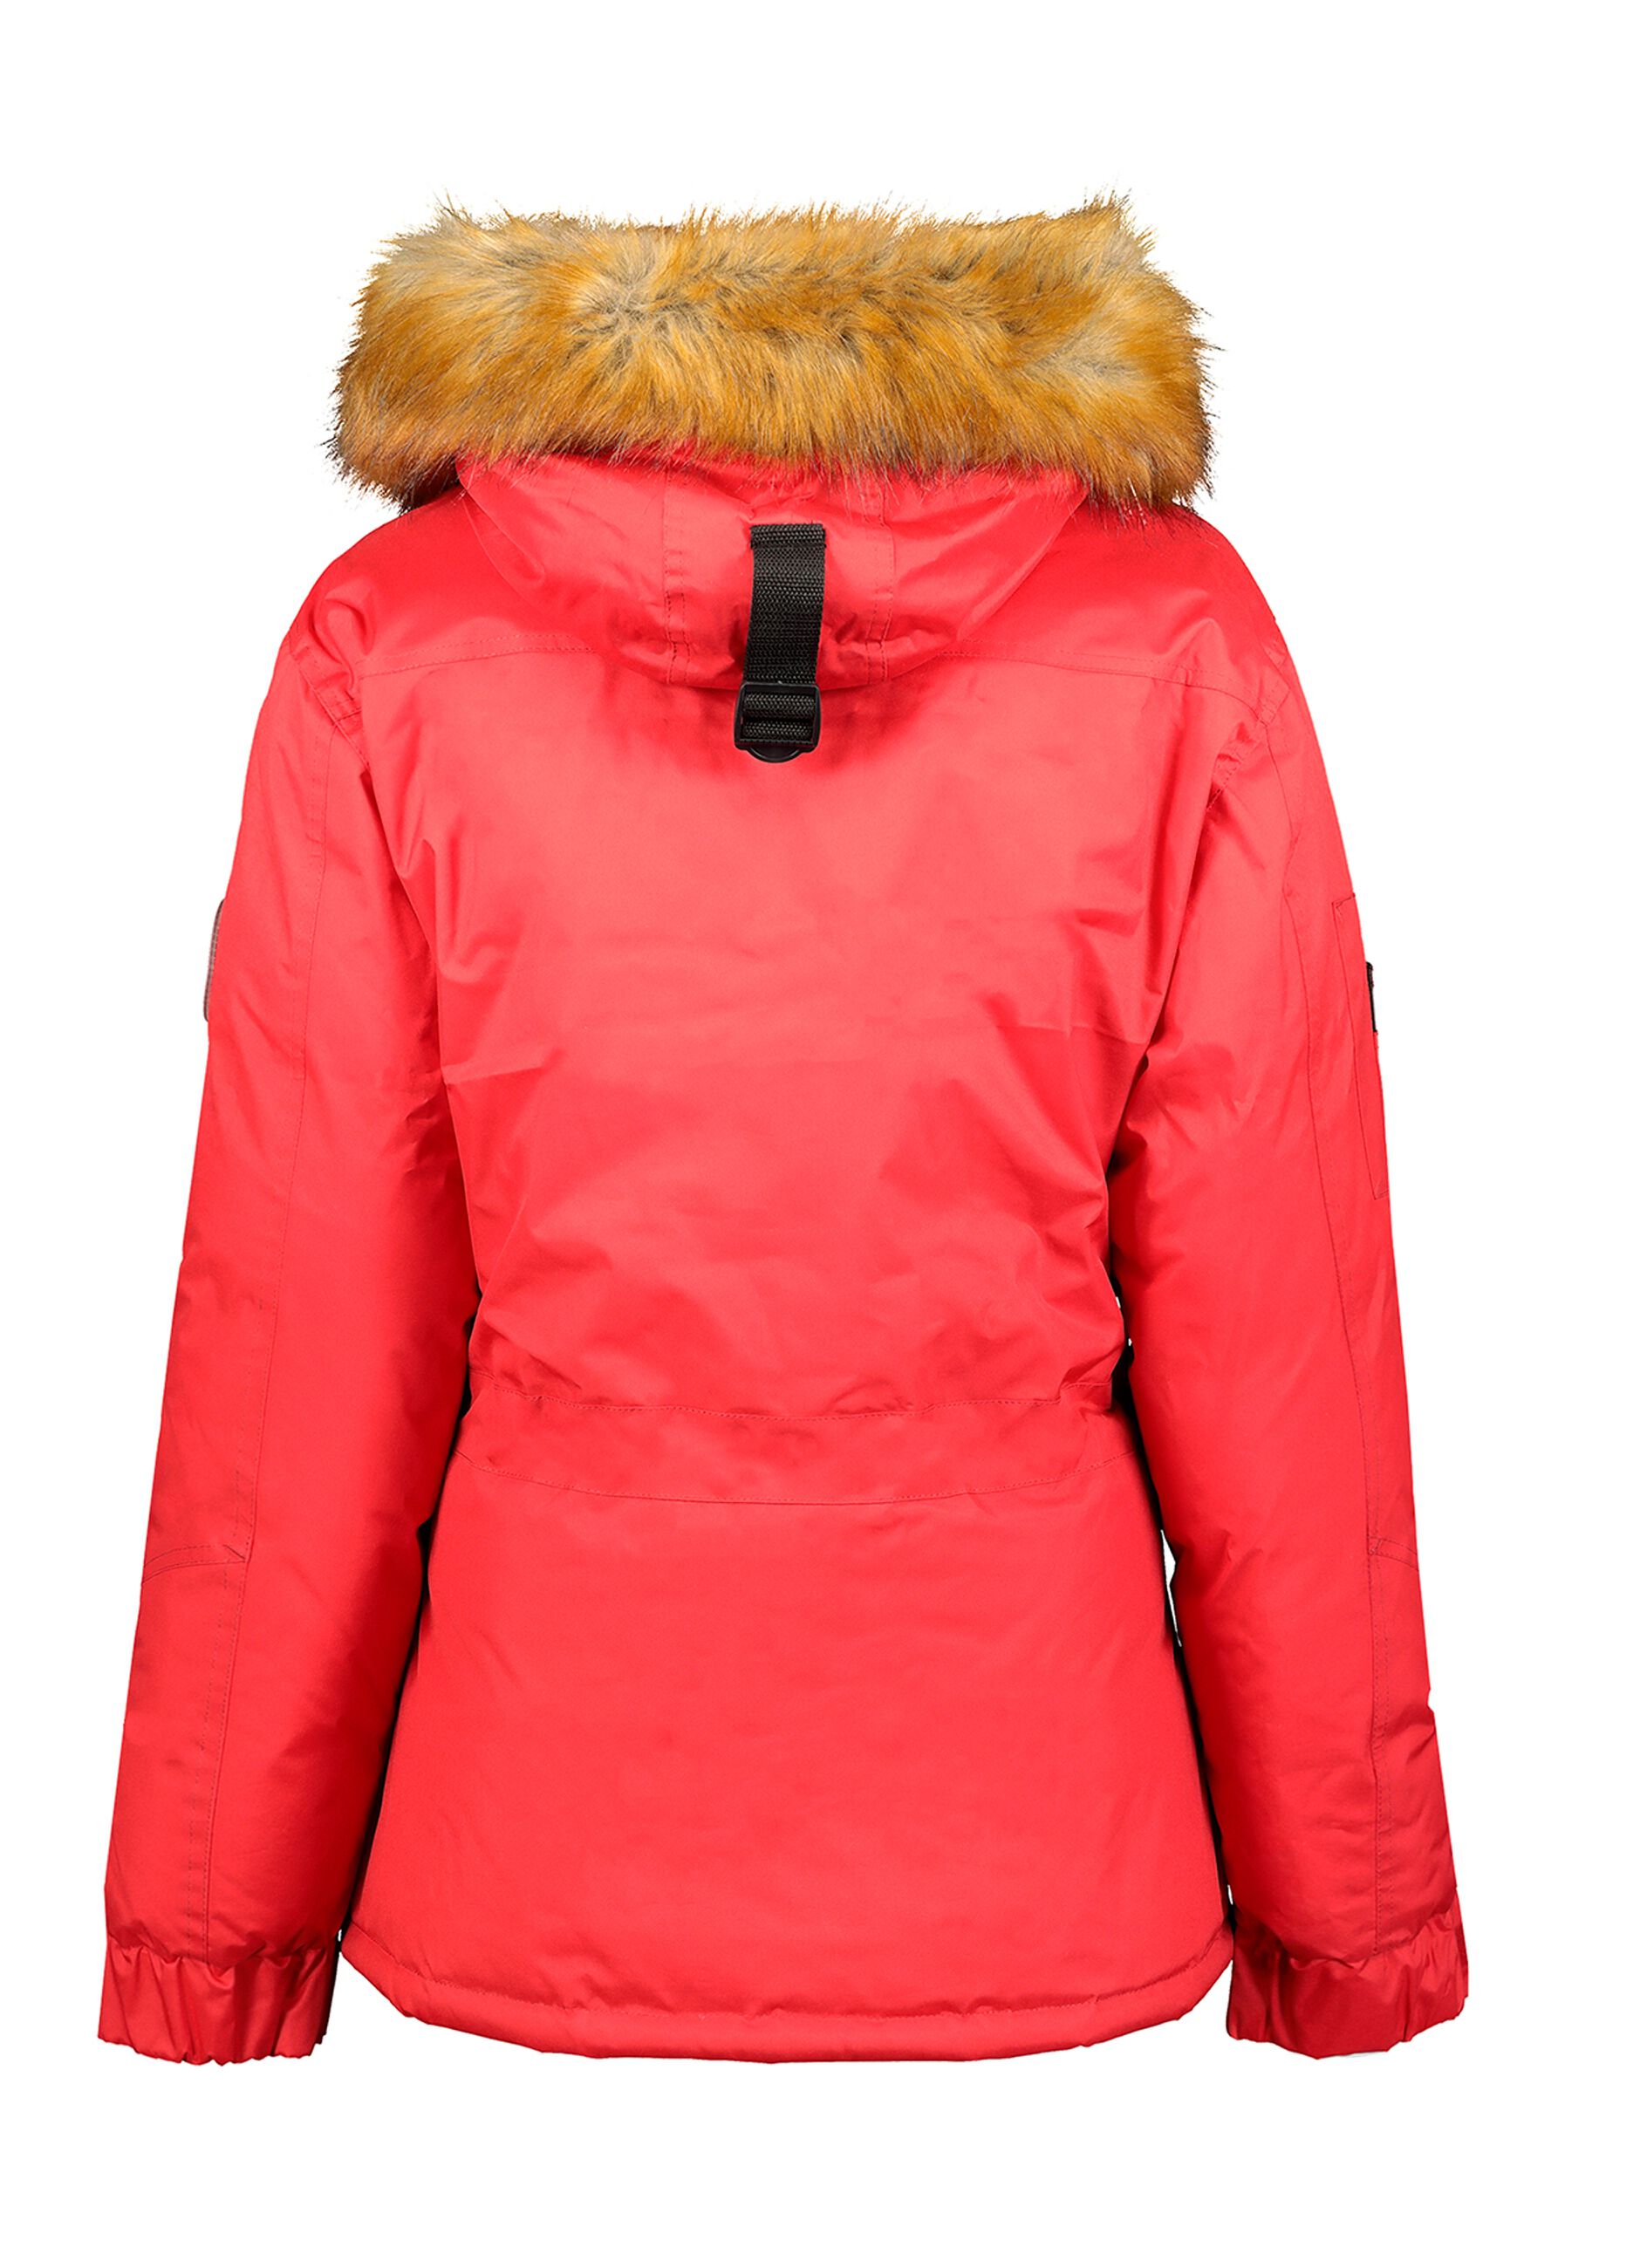 Geographical Norway full-zip parka